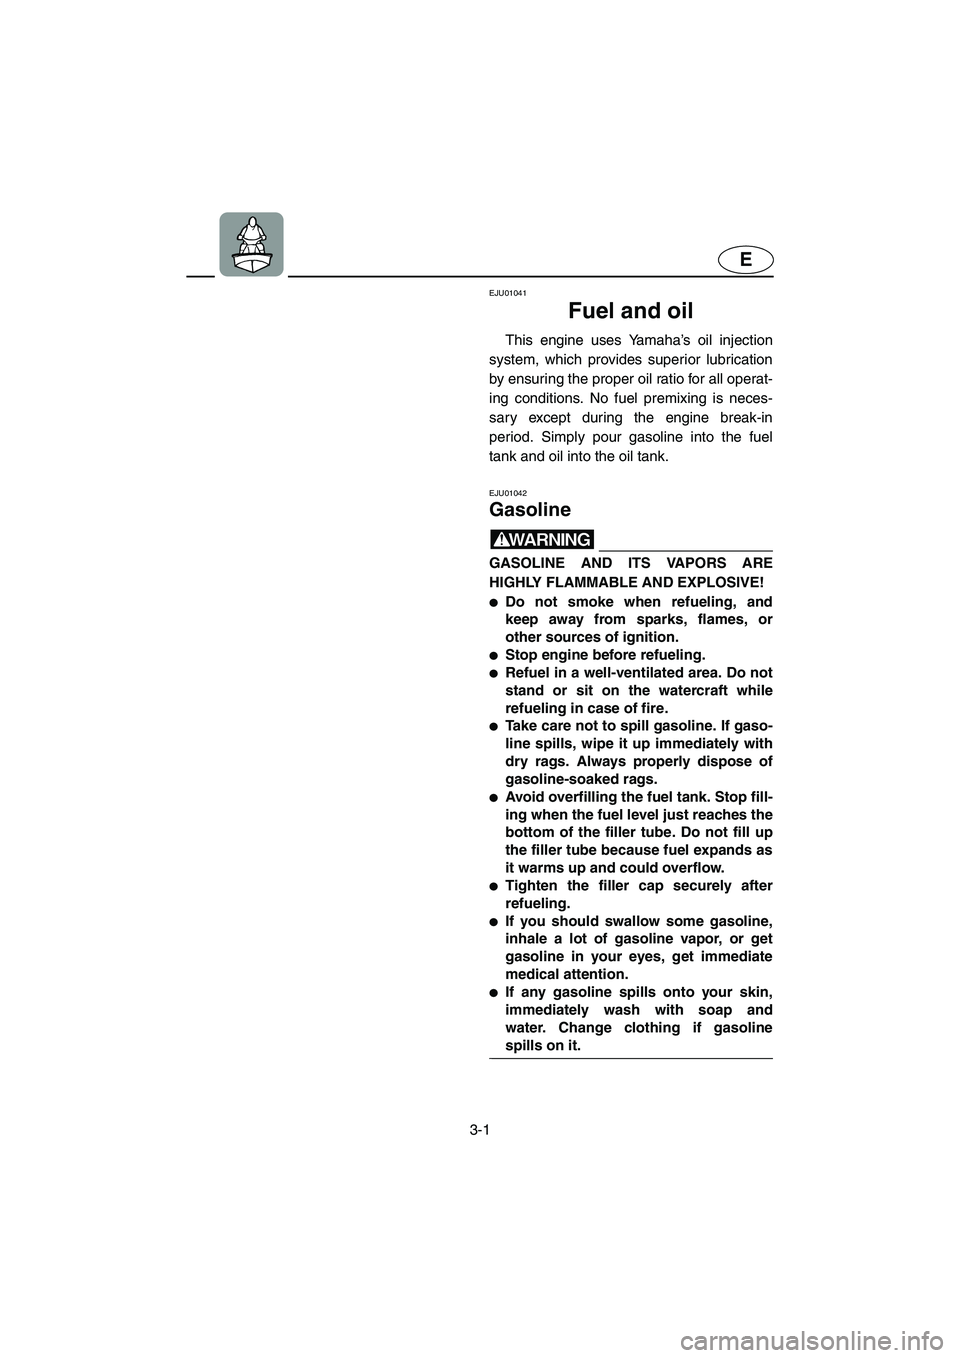 YAMAHA GP800R 2002 Service Manual 3-1
E
EJU01041 
Fuel and oil  
This engine uses Yamaha’s oil injection
system, which provides superior lubrication
by ensuring the proper oil ratio for all operat-
ing conditions. No fuel premixing 